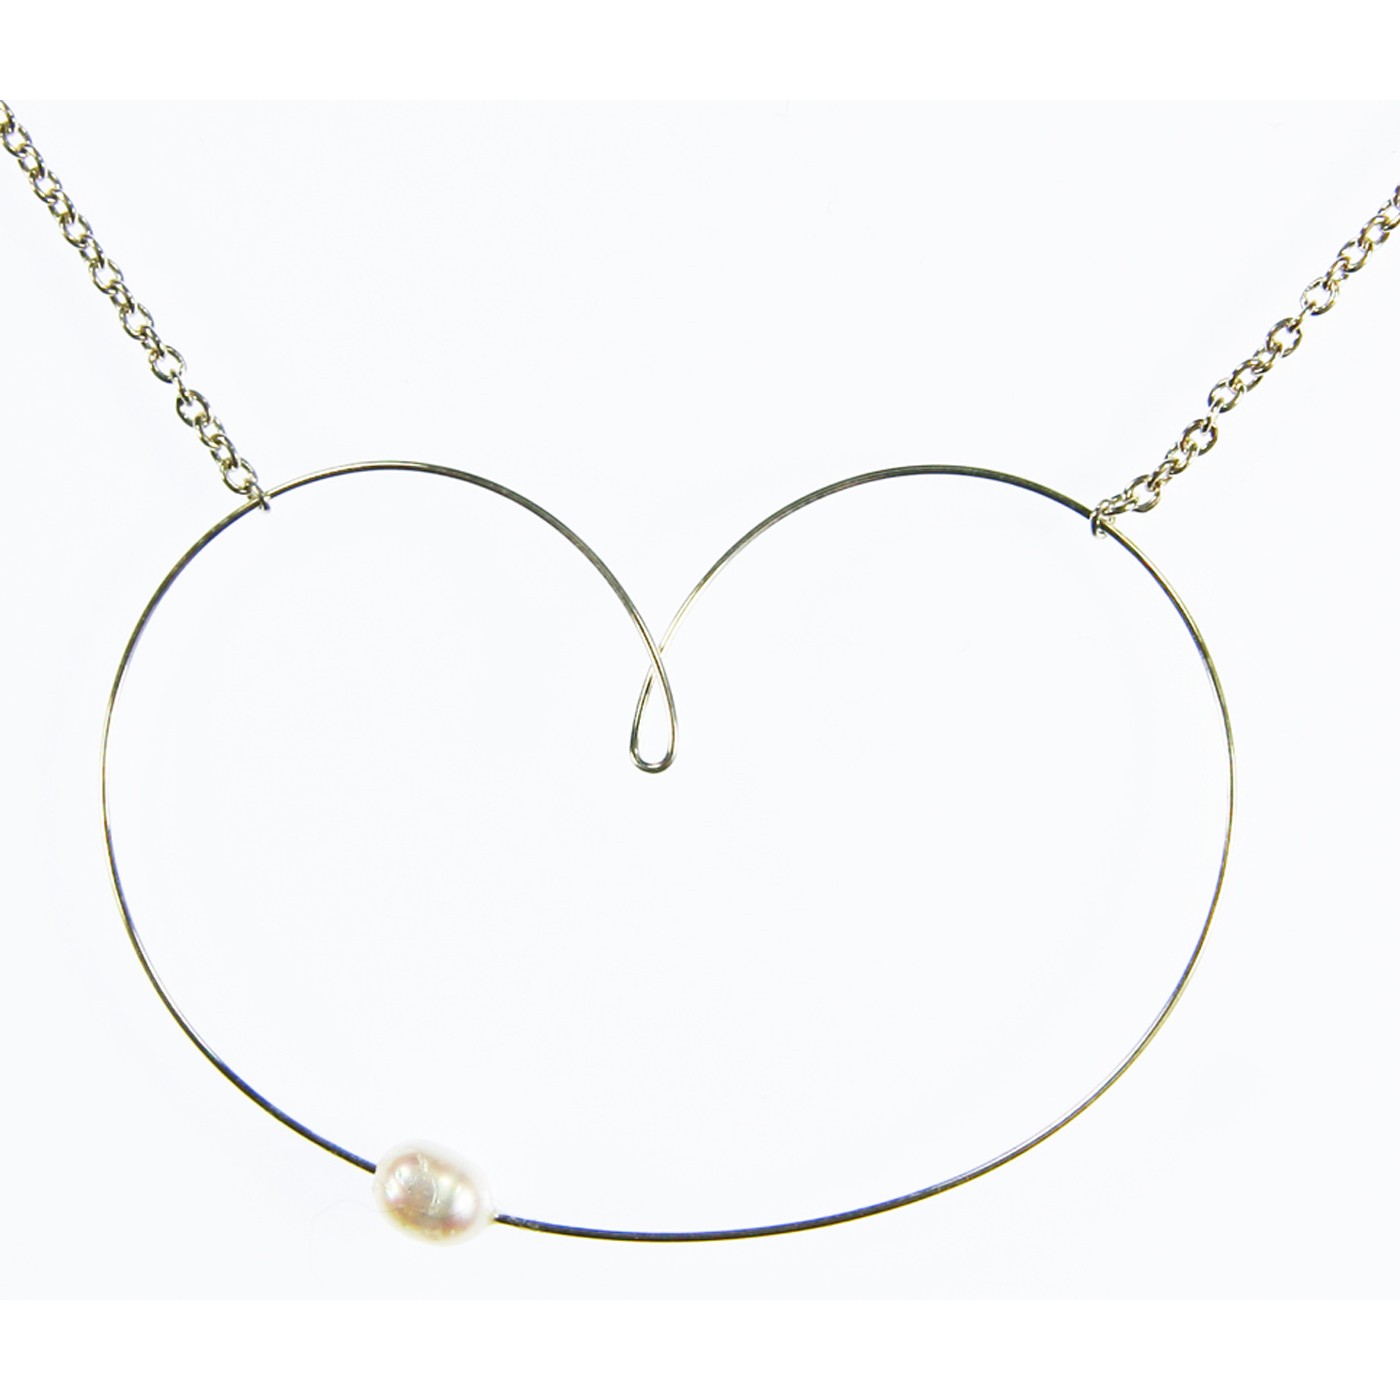 Simple Heart Necklace With Freshwater Seed Pearls - Necklaces ...